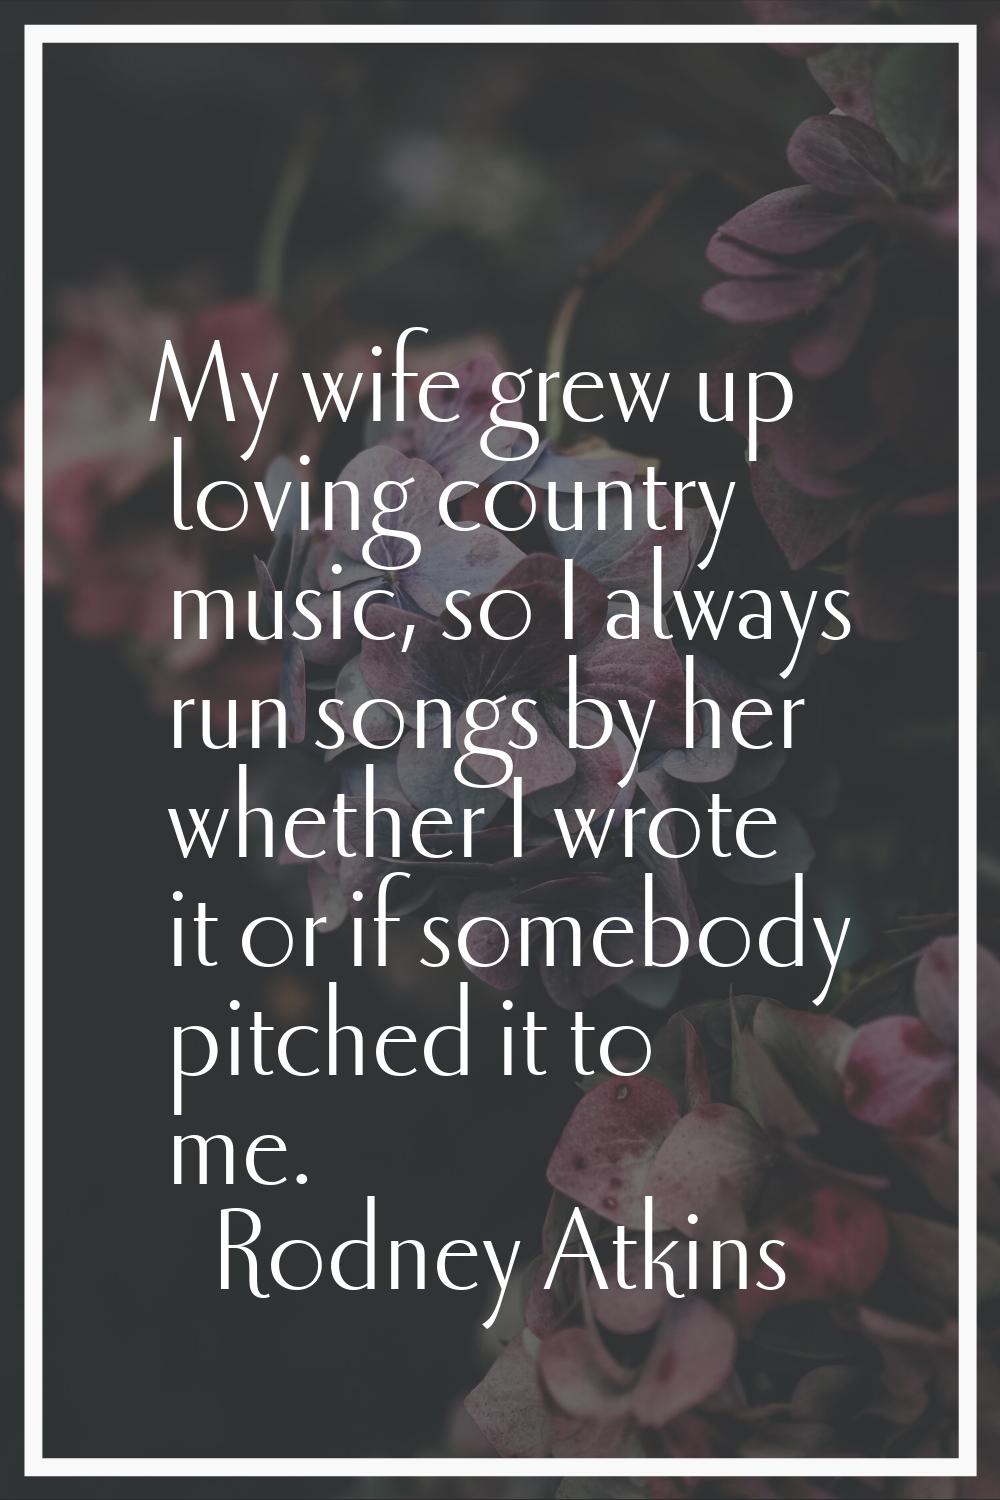 My wife grew up loving country music, so I always run songs by her whether I wrote it or if somebod